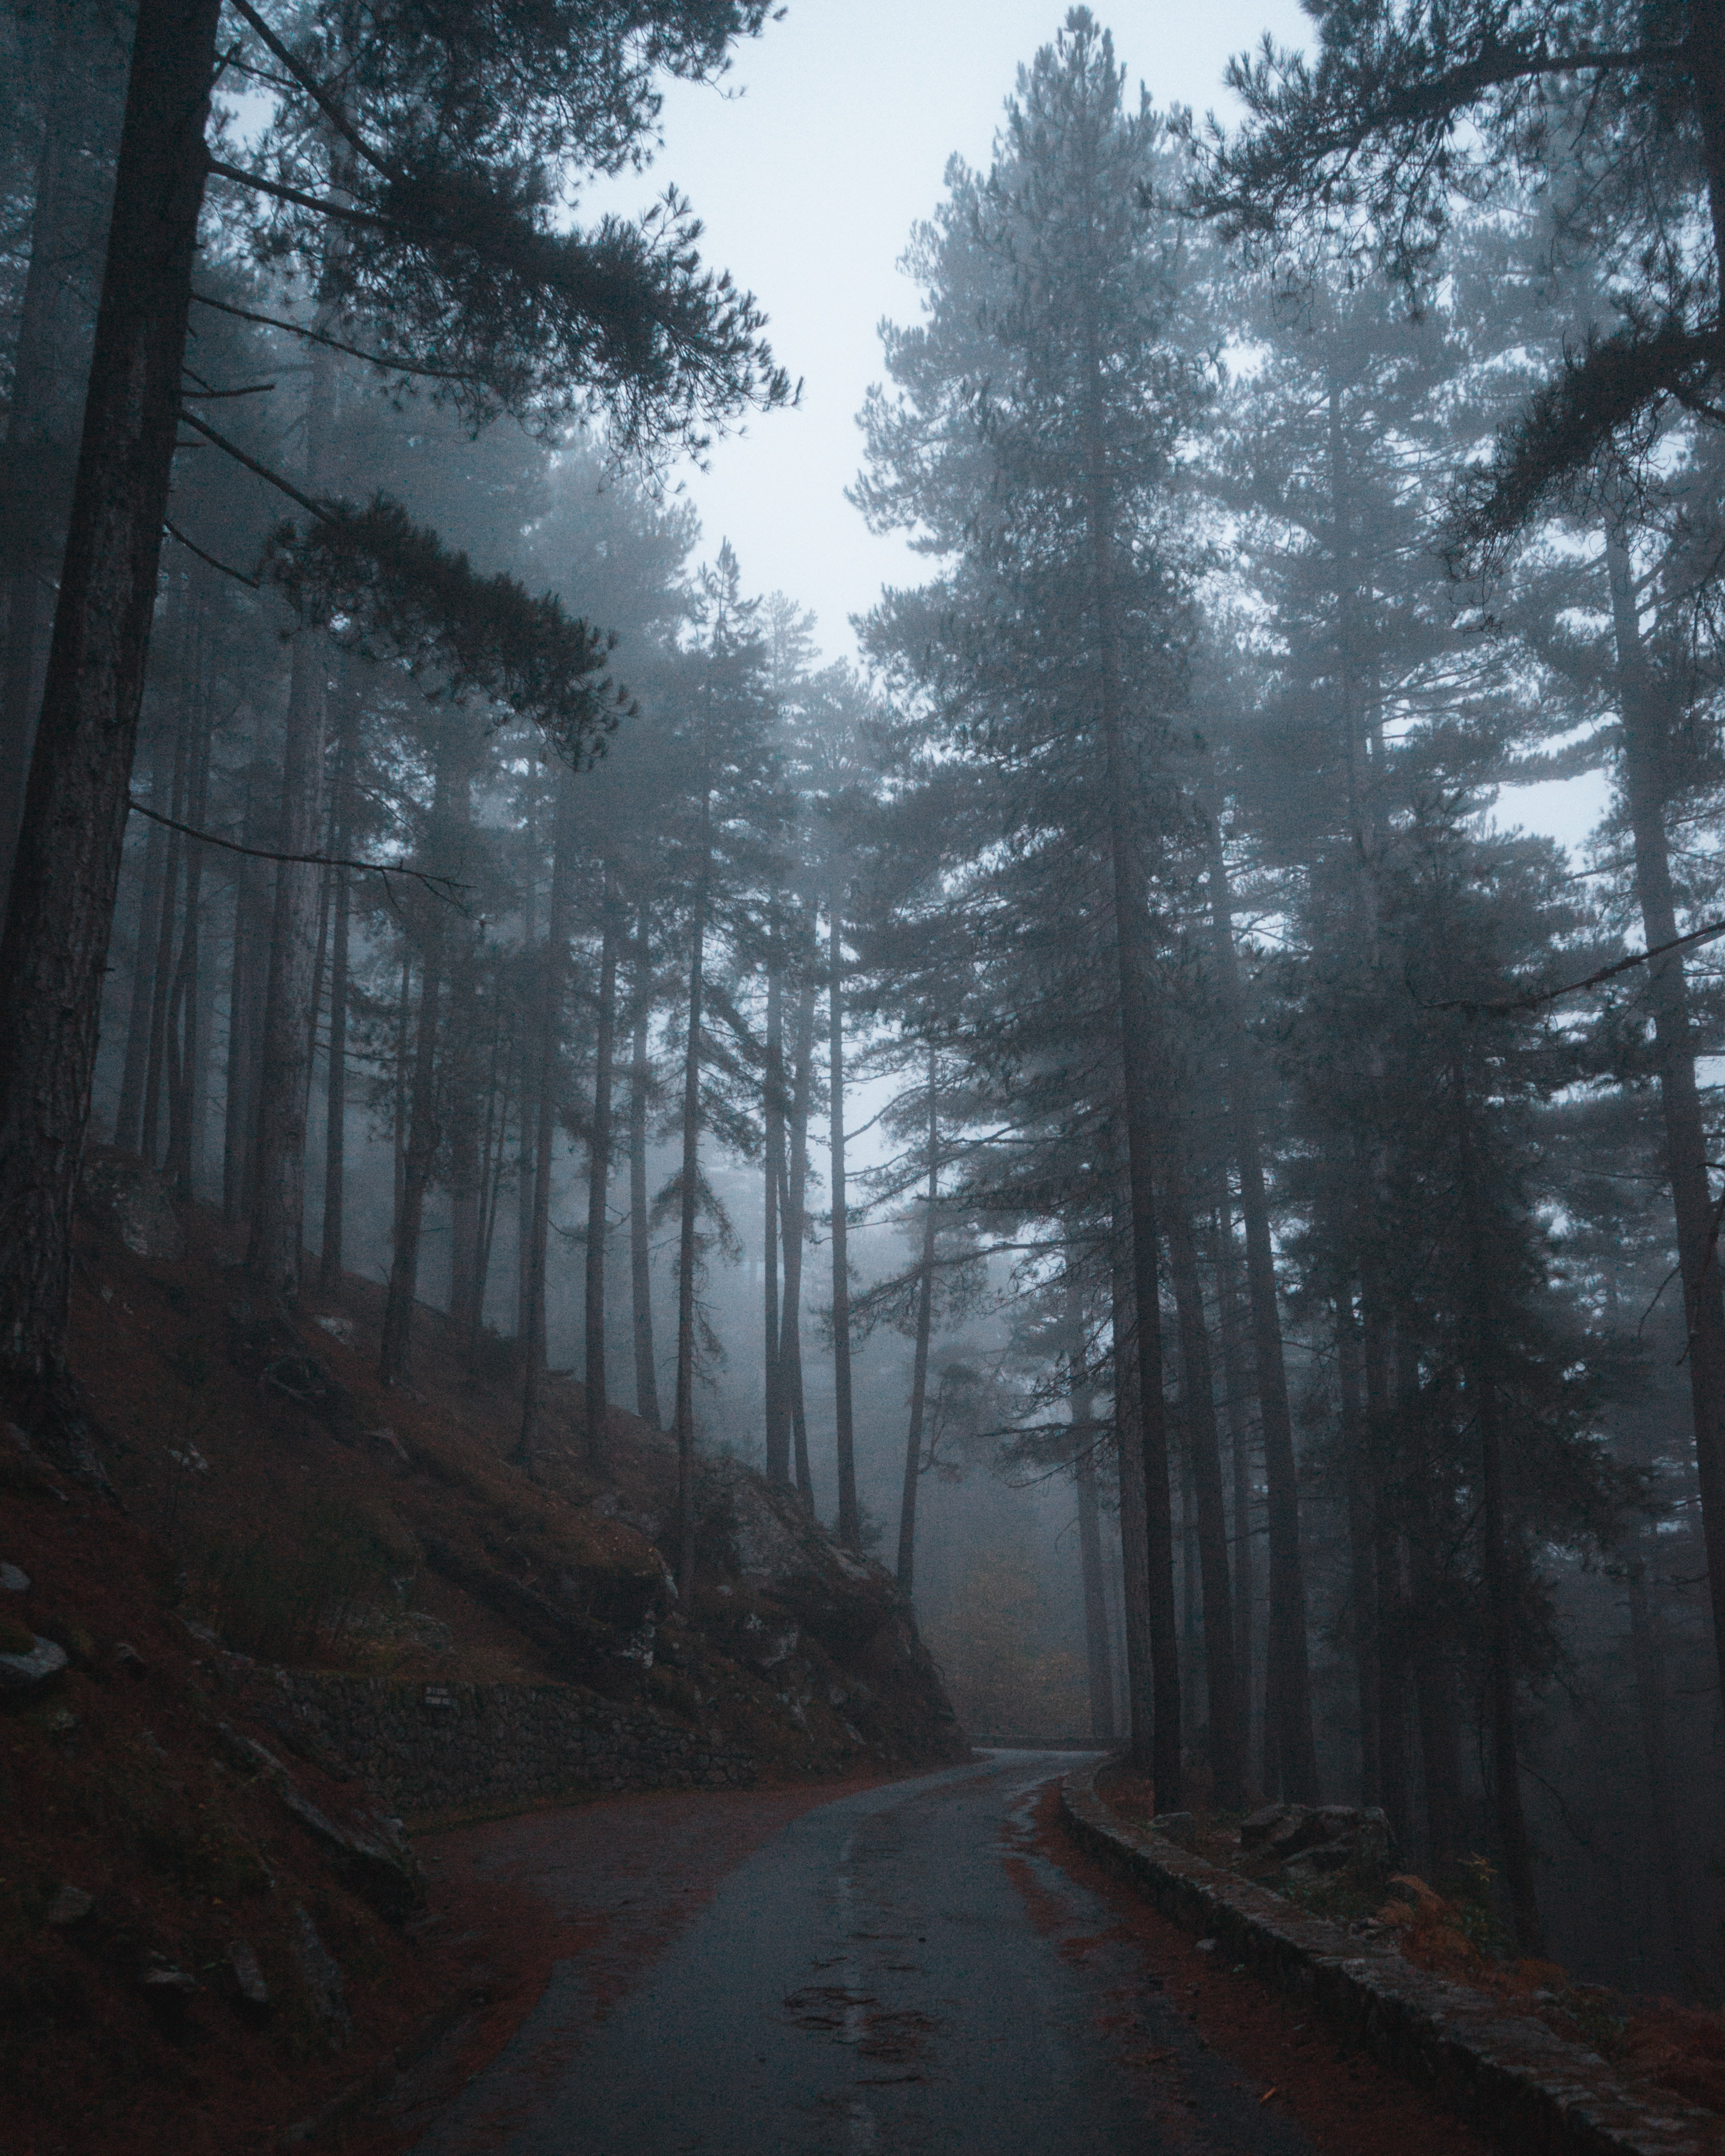 New Lock Screen Wallpapers fog, slope, nature, trees, road, forest